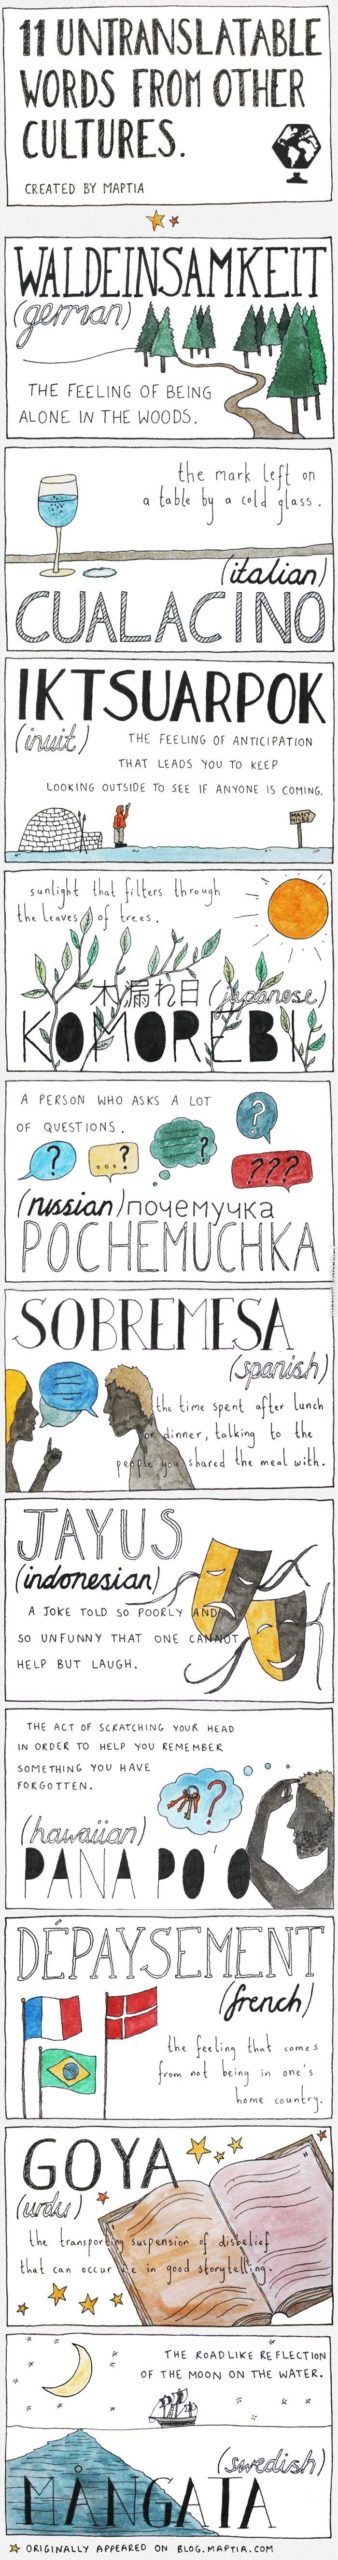 11+untranslatable+words+from+other+cultures